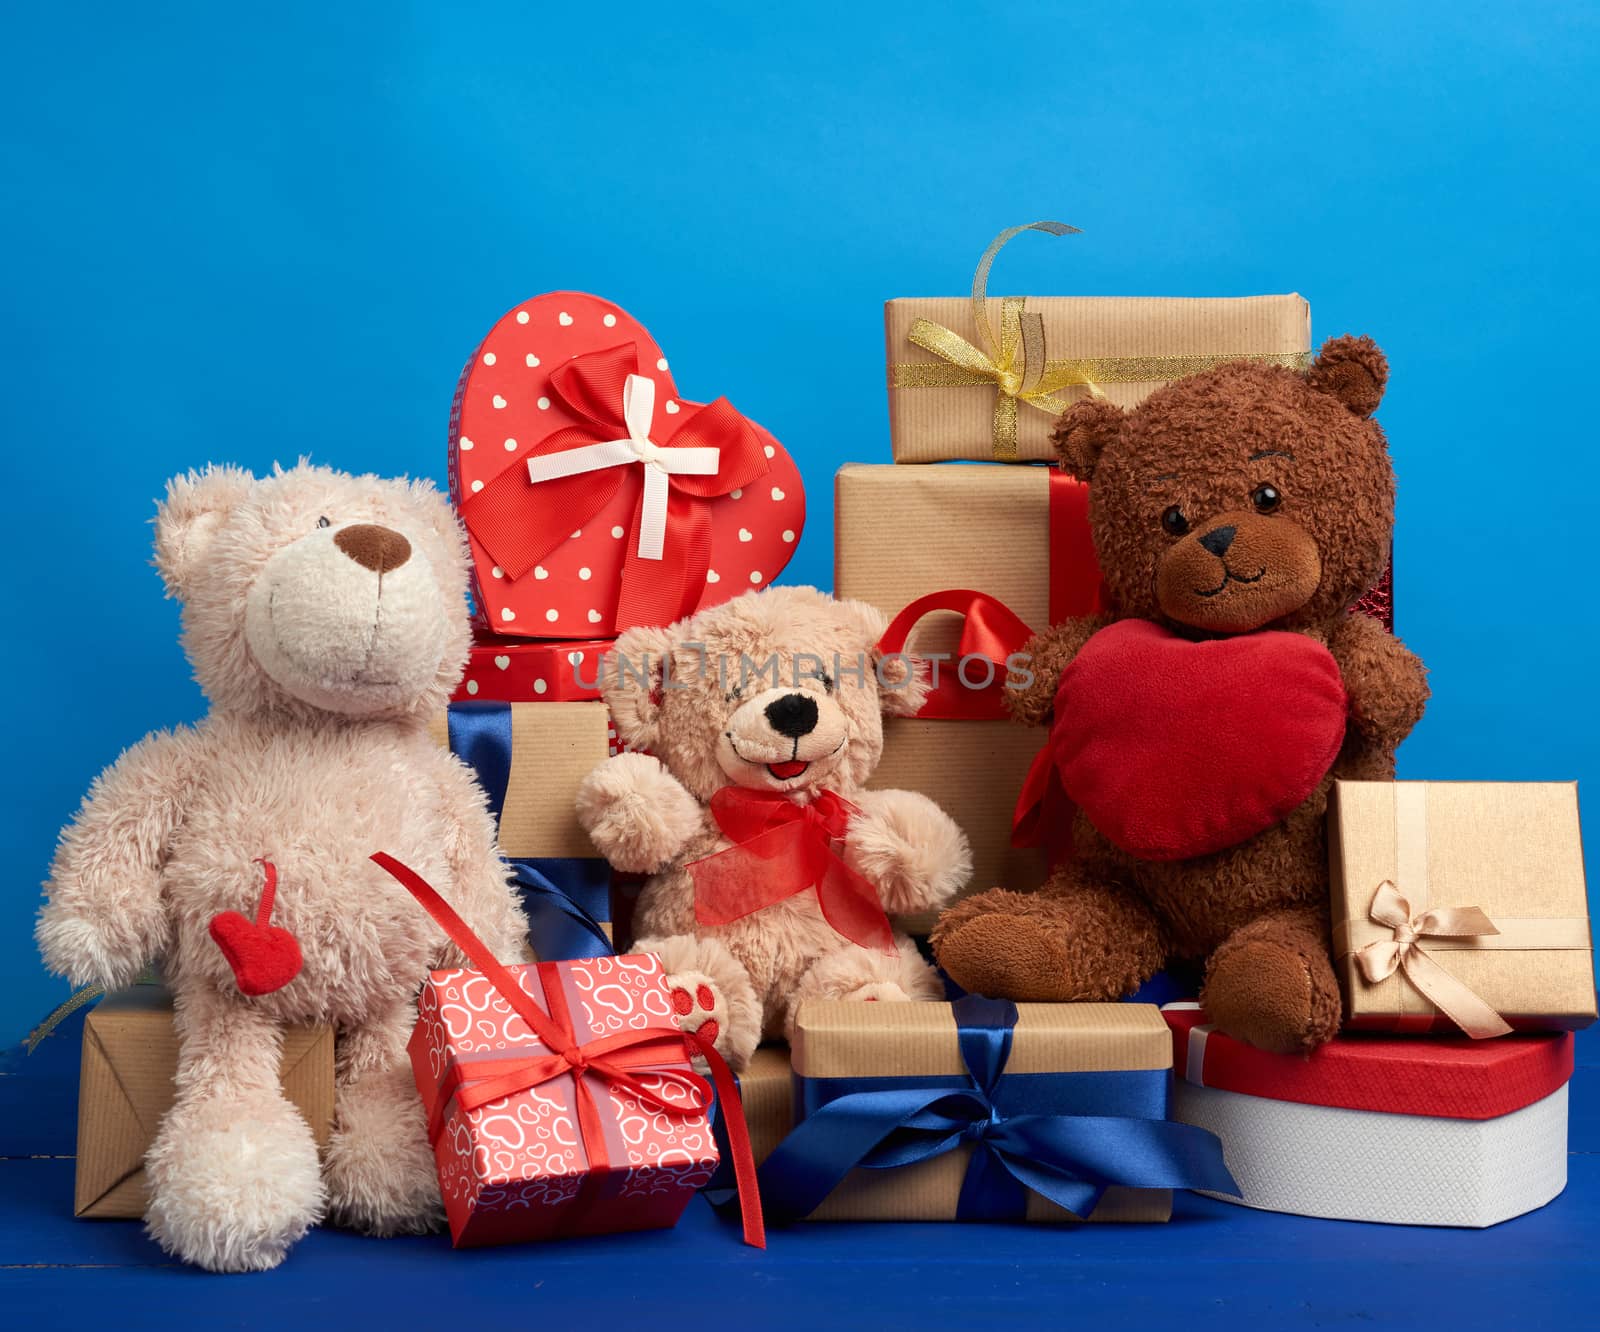 bunch of gifts in boxes tied with silk ribbons and soft teddy bears on a blue background, festive backdrop for birthday, Christmas